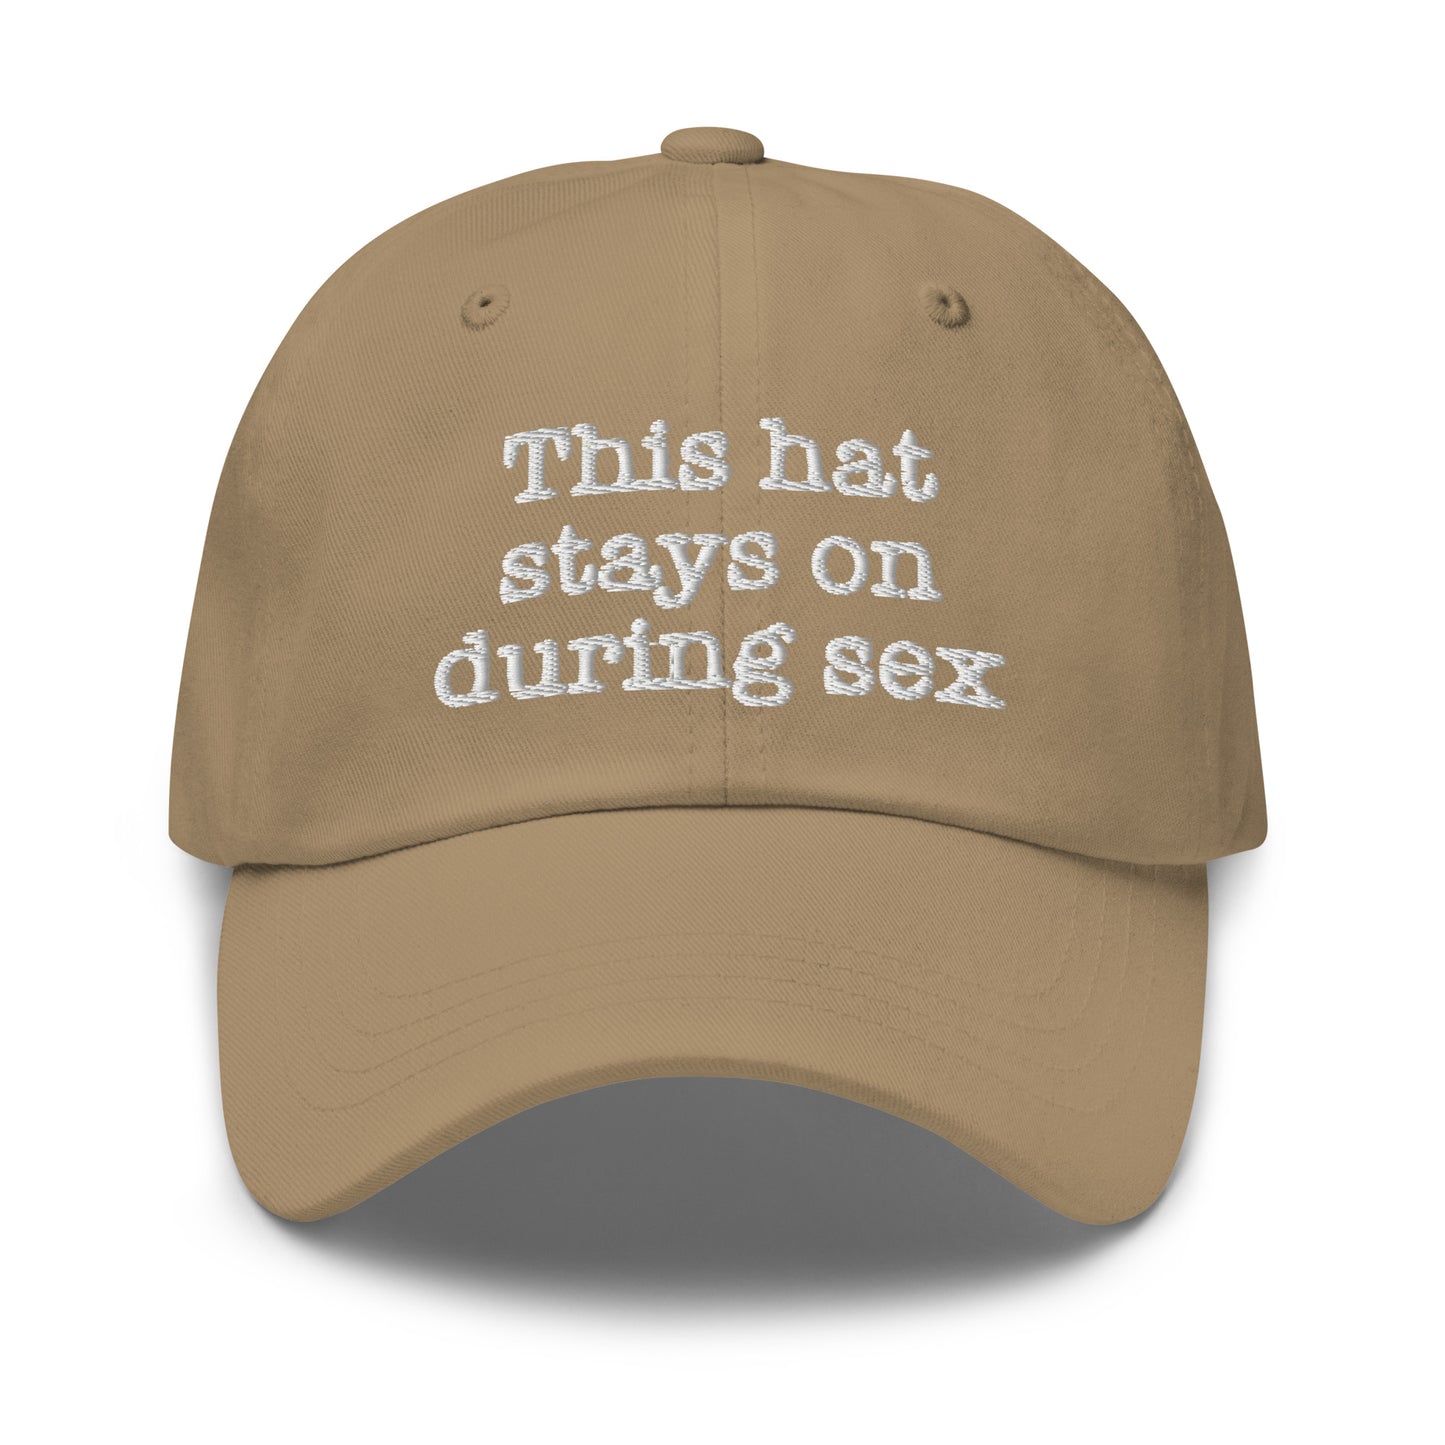 This hat stays on during sex.